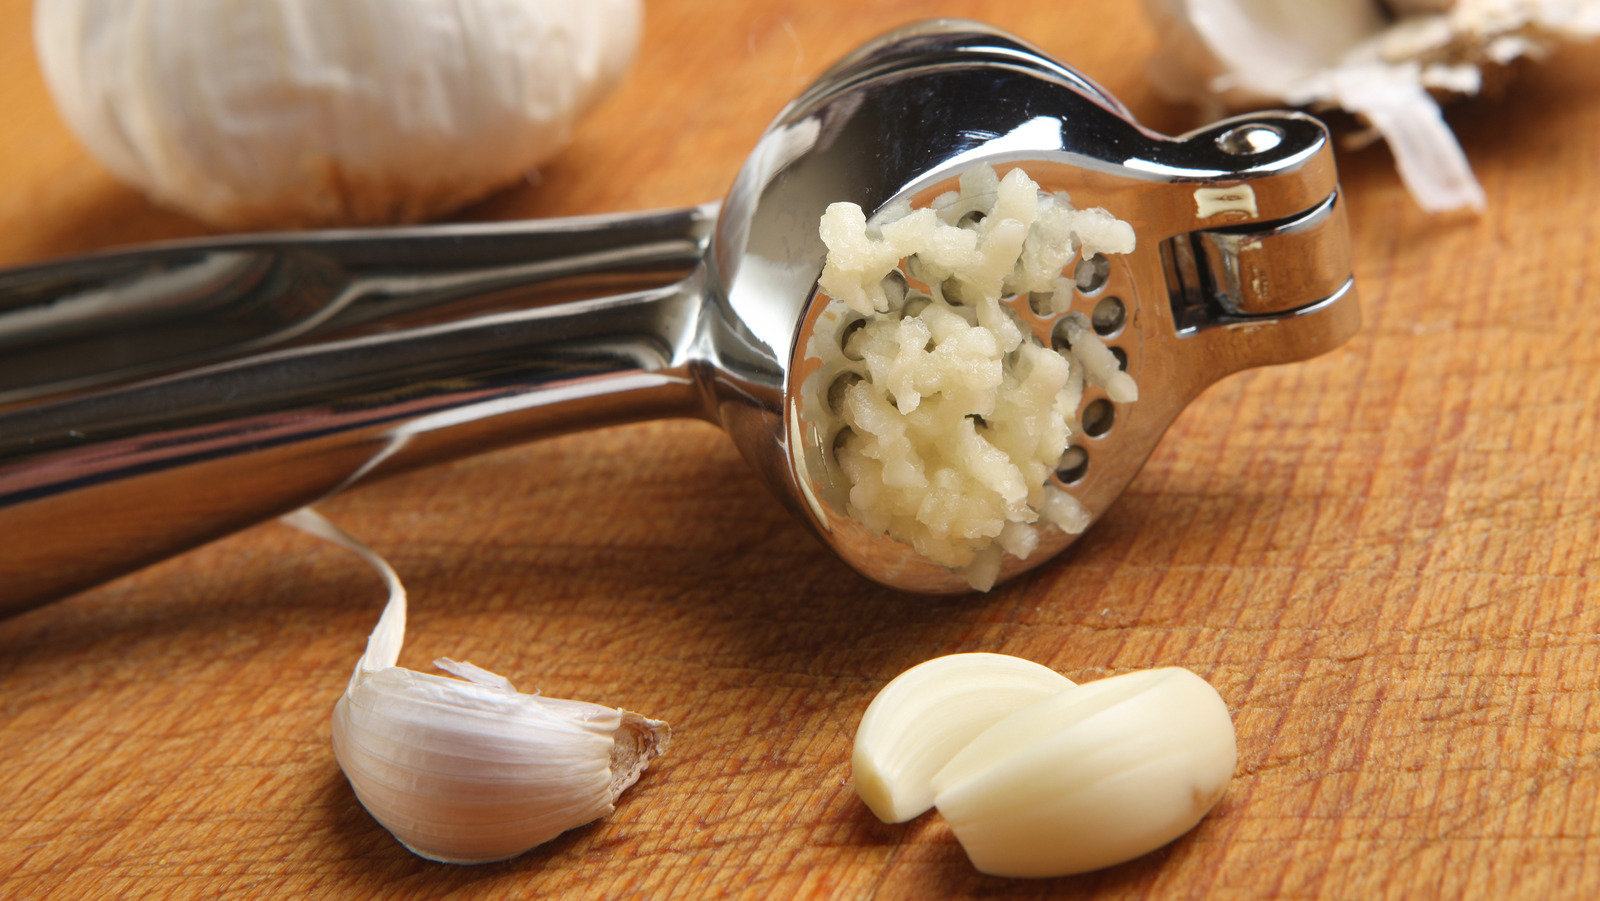 https://www.tastingtable.com/img/gallery/the-absolute-best-uses-for-your-garlic-press/l-intro-1675268990.jpg